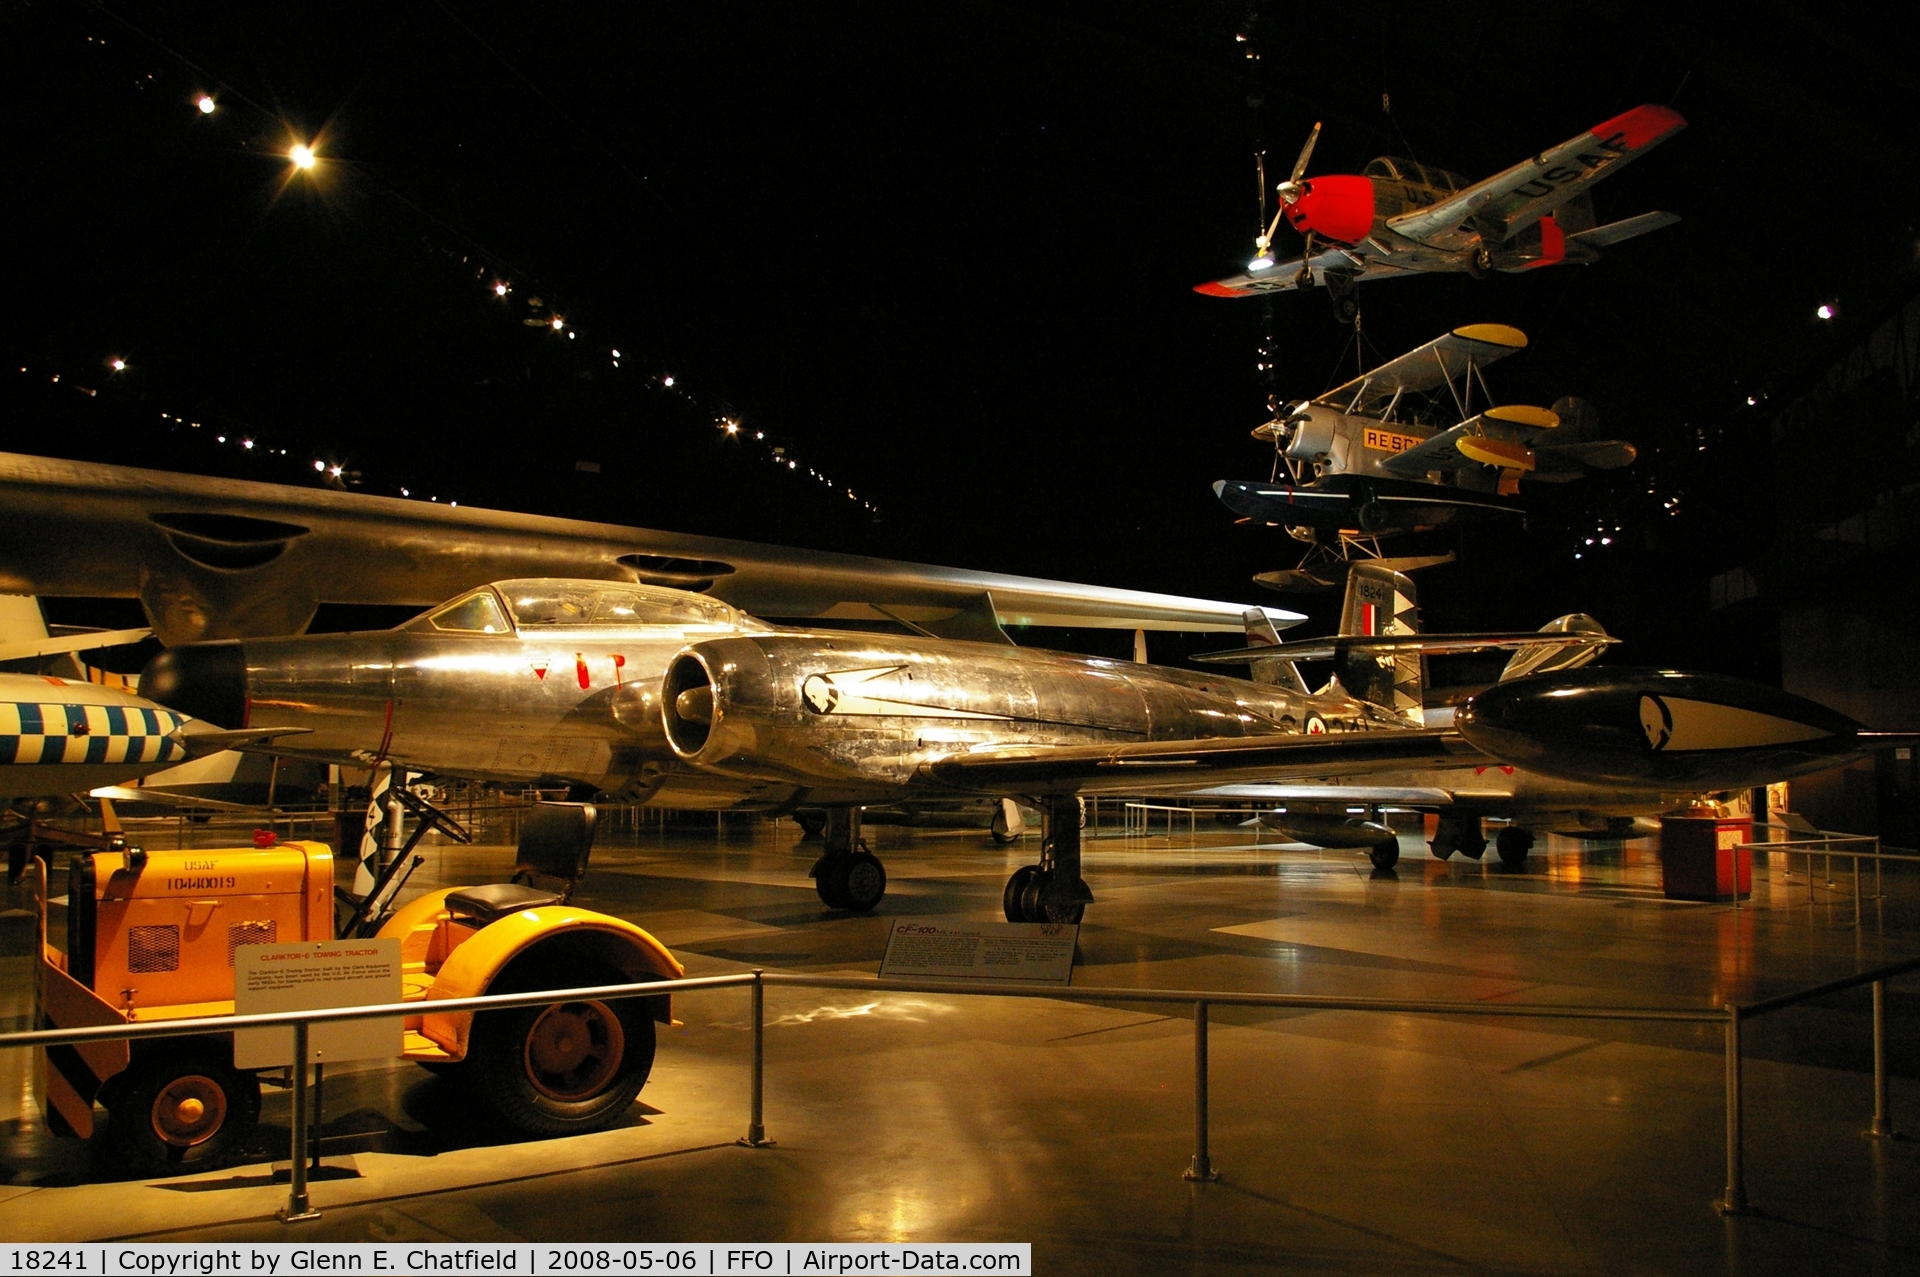 18241, 1954 Avro Canada CF-100 Mk.4A Canuck C/N 141, Displayed at the National Museum of the U.S. Air Force